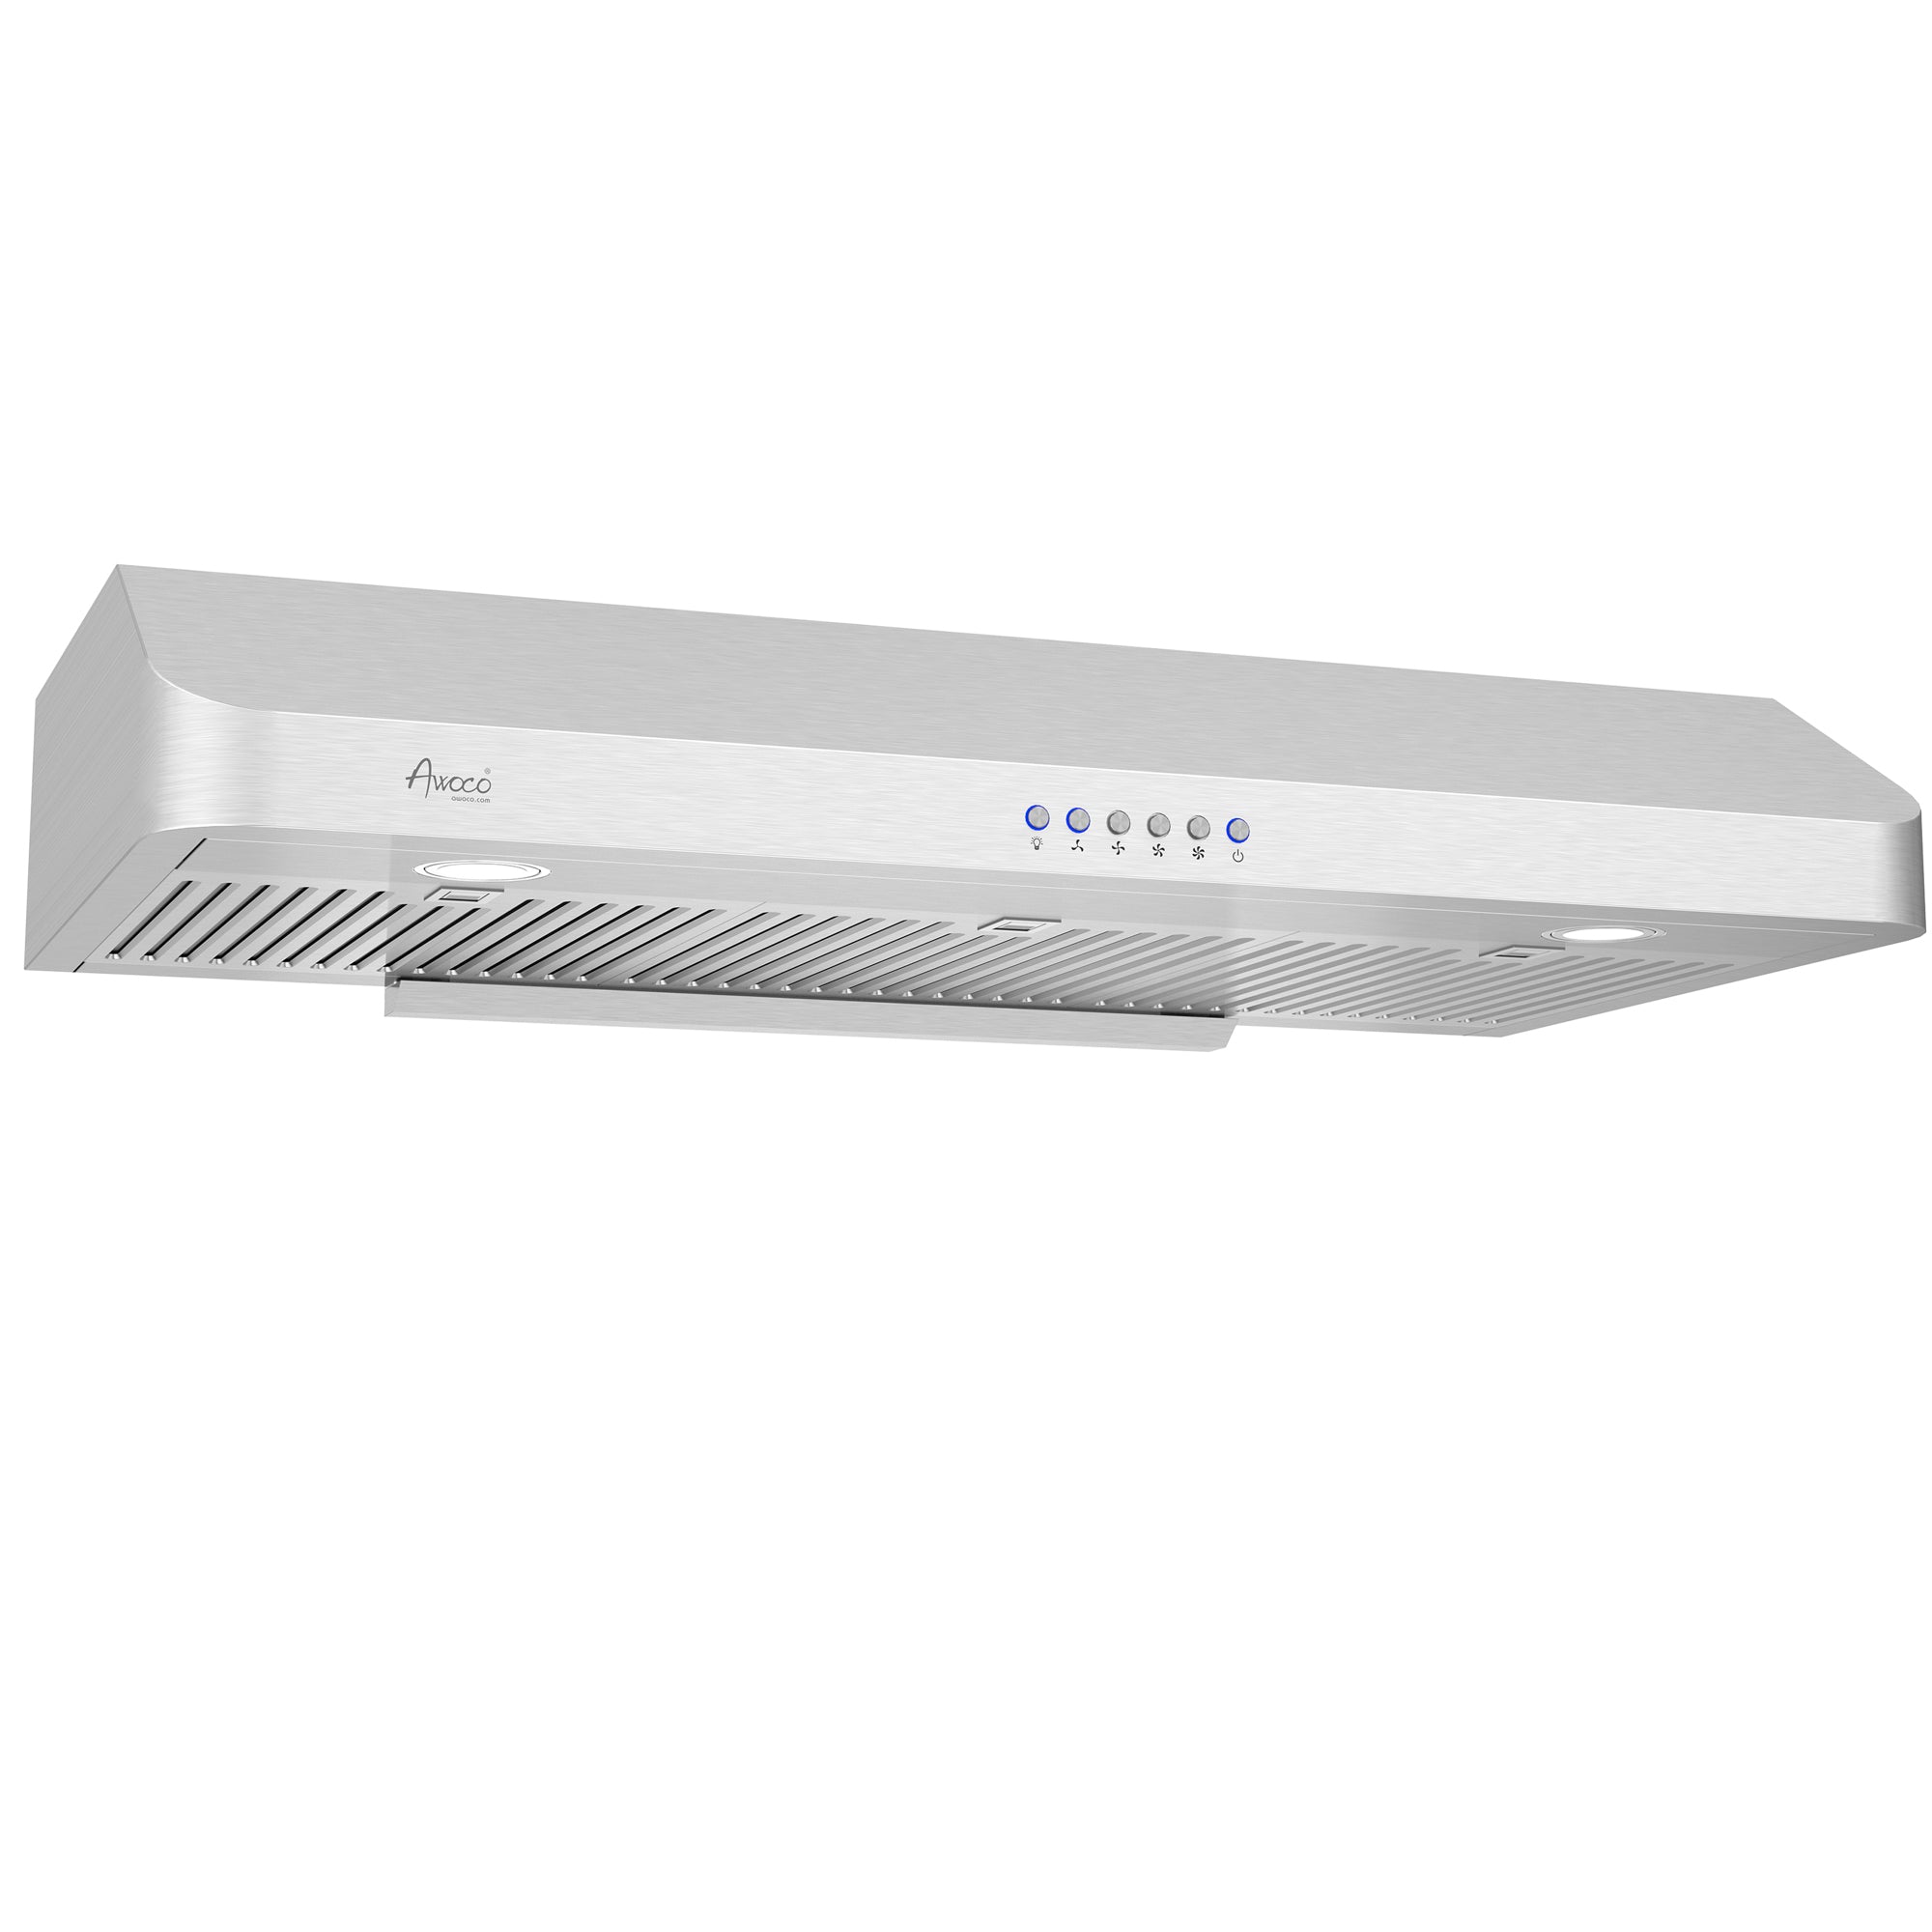 Awoco RH-C06-36 Classic 6" High Stainless Steel Under Cabinet 4 Speeds 900CFM Range Hood with 2 LED Lights Top Vent